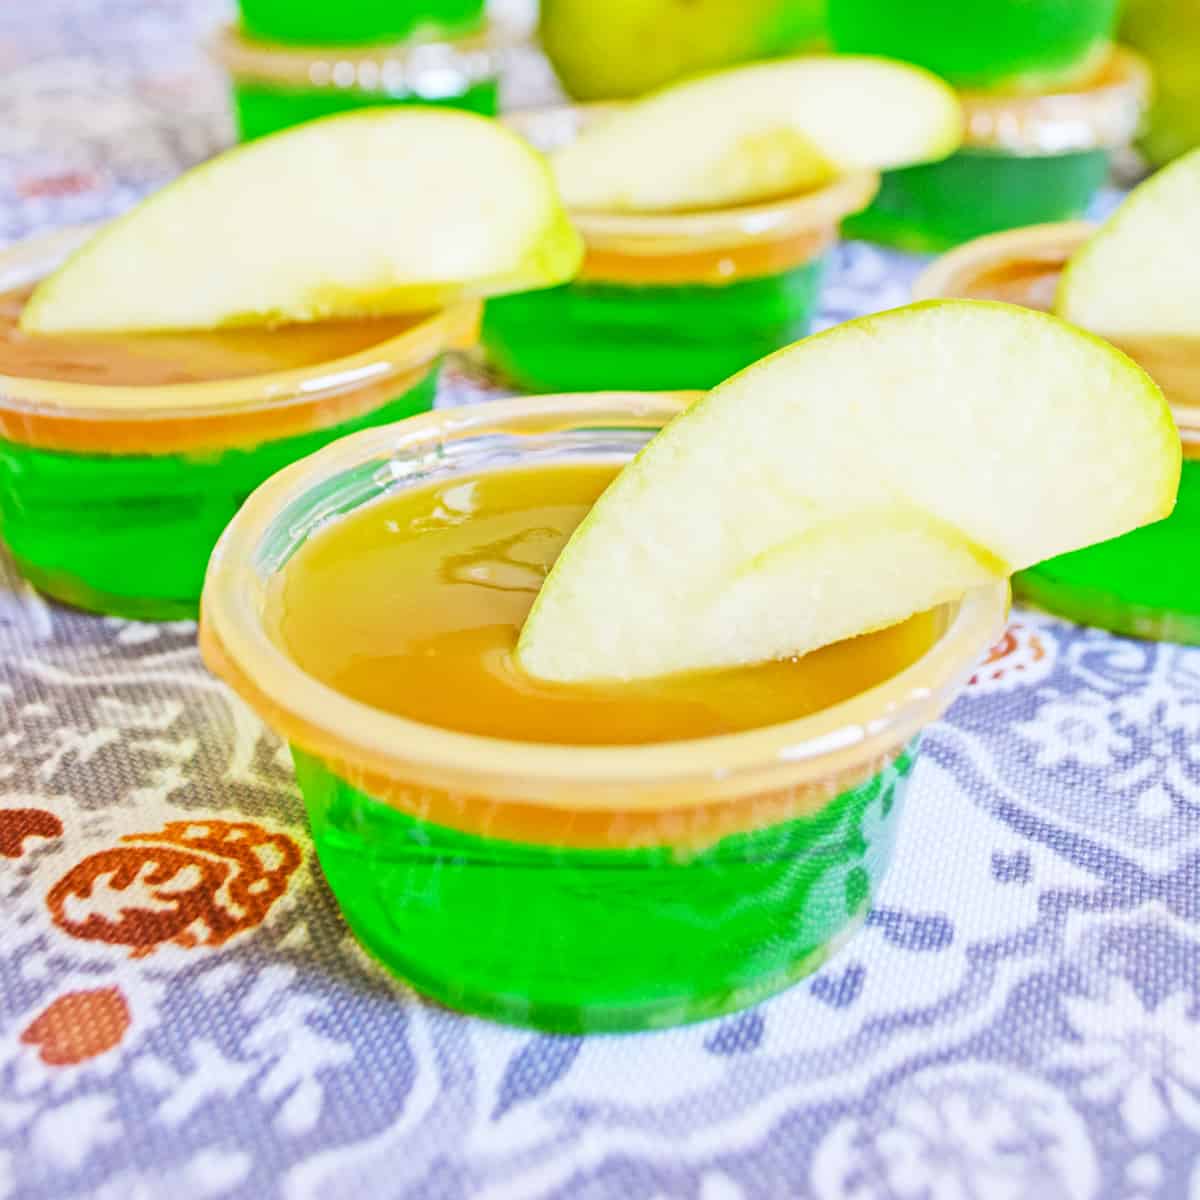 Green apple jello shot with caramel vodka, caramel topping, and fresh apple wedge.